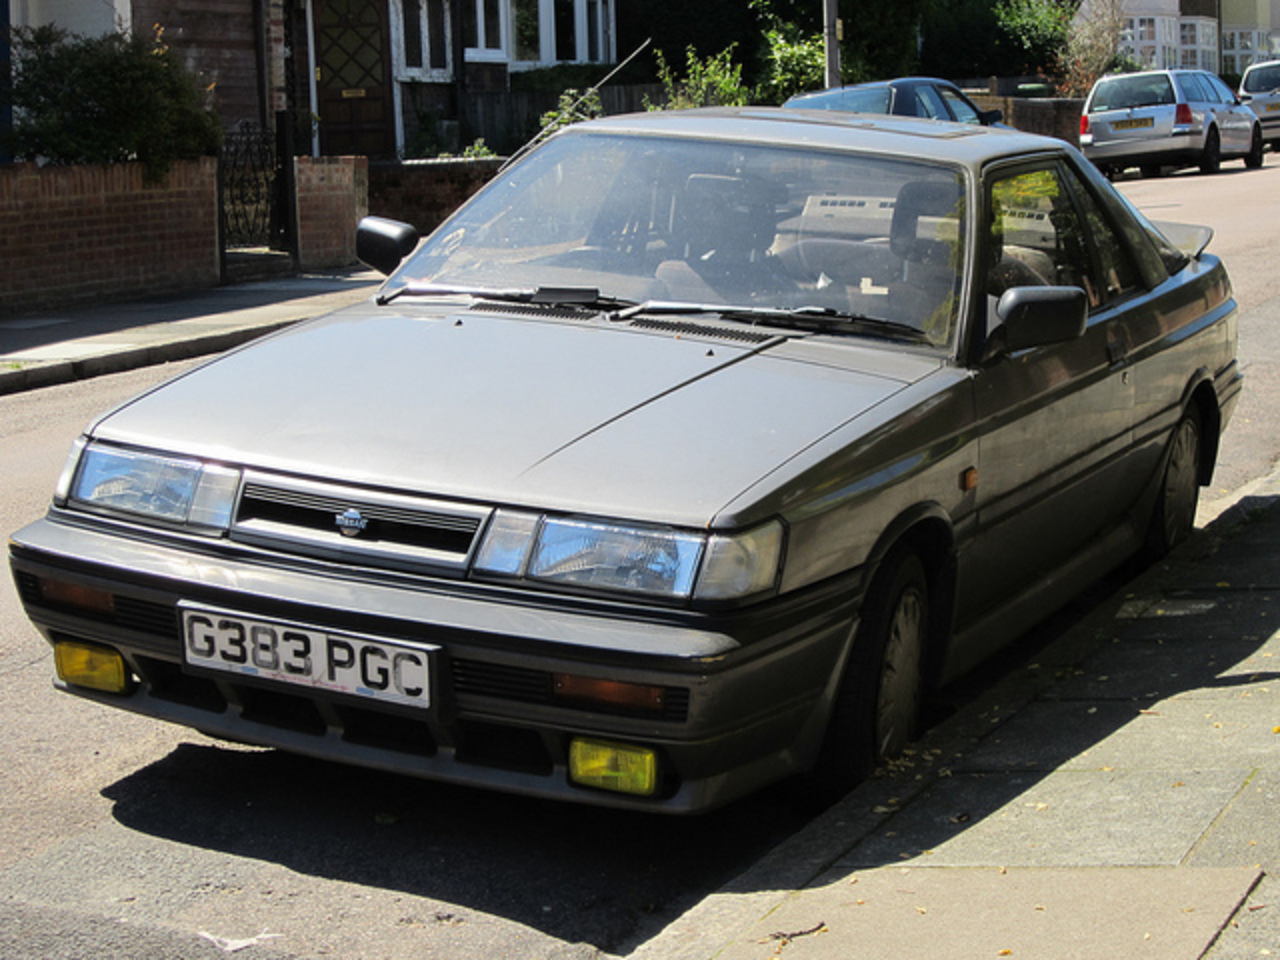 1990 Nissan Sunny 1.8 ZX Coupe. | Flickr - Photo Sharing!